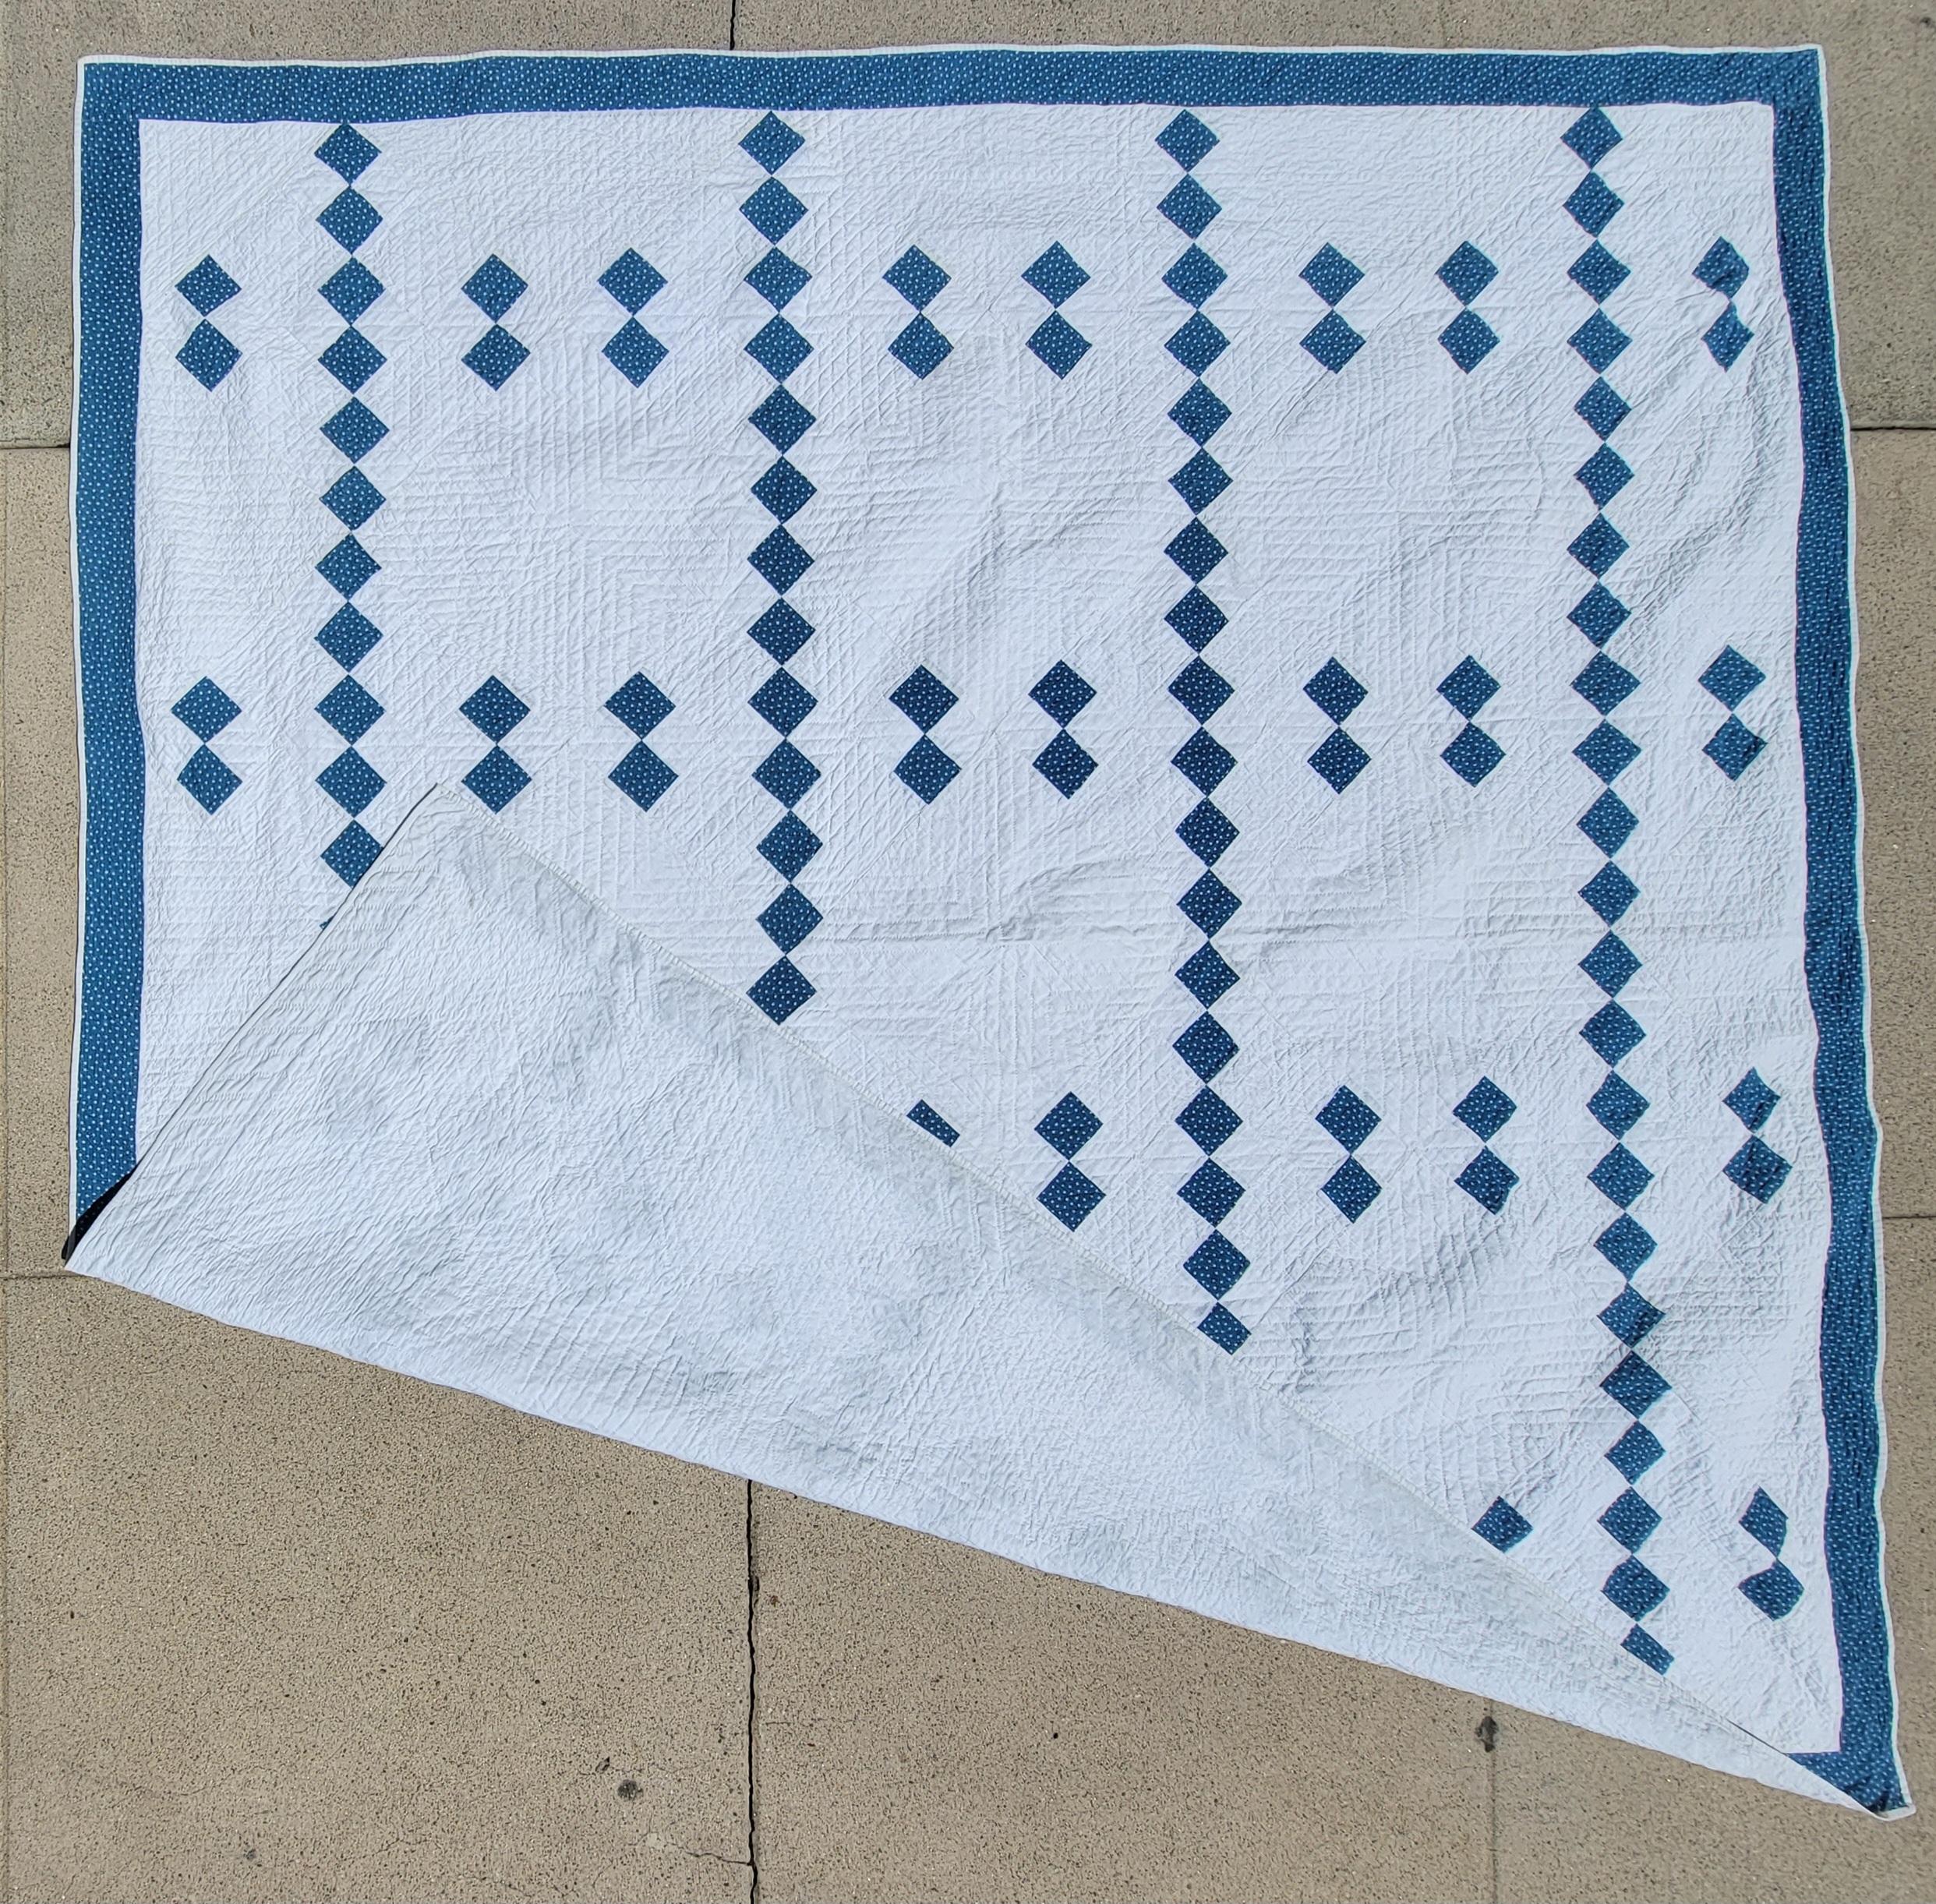 19th century Blue & white Irish chain quilt with fine quilting.This quilt is in great condition.